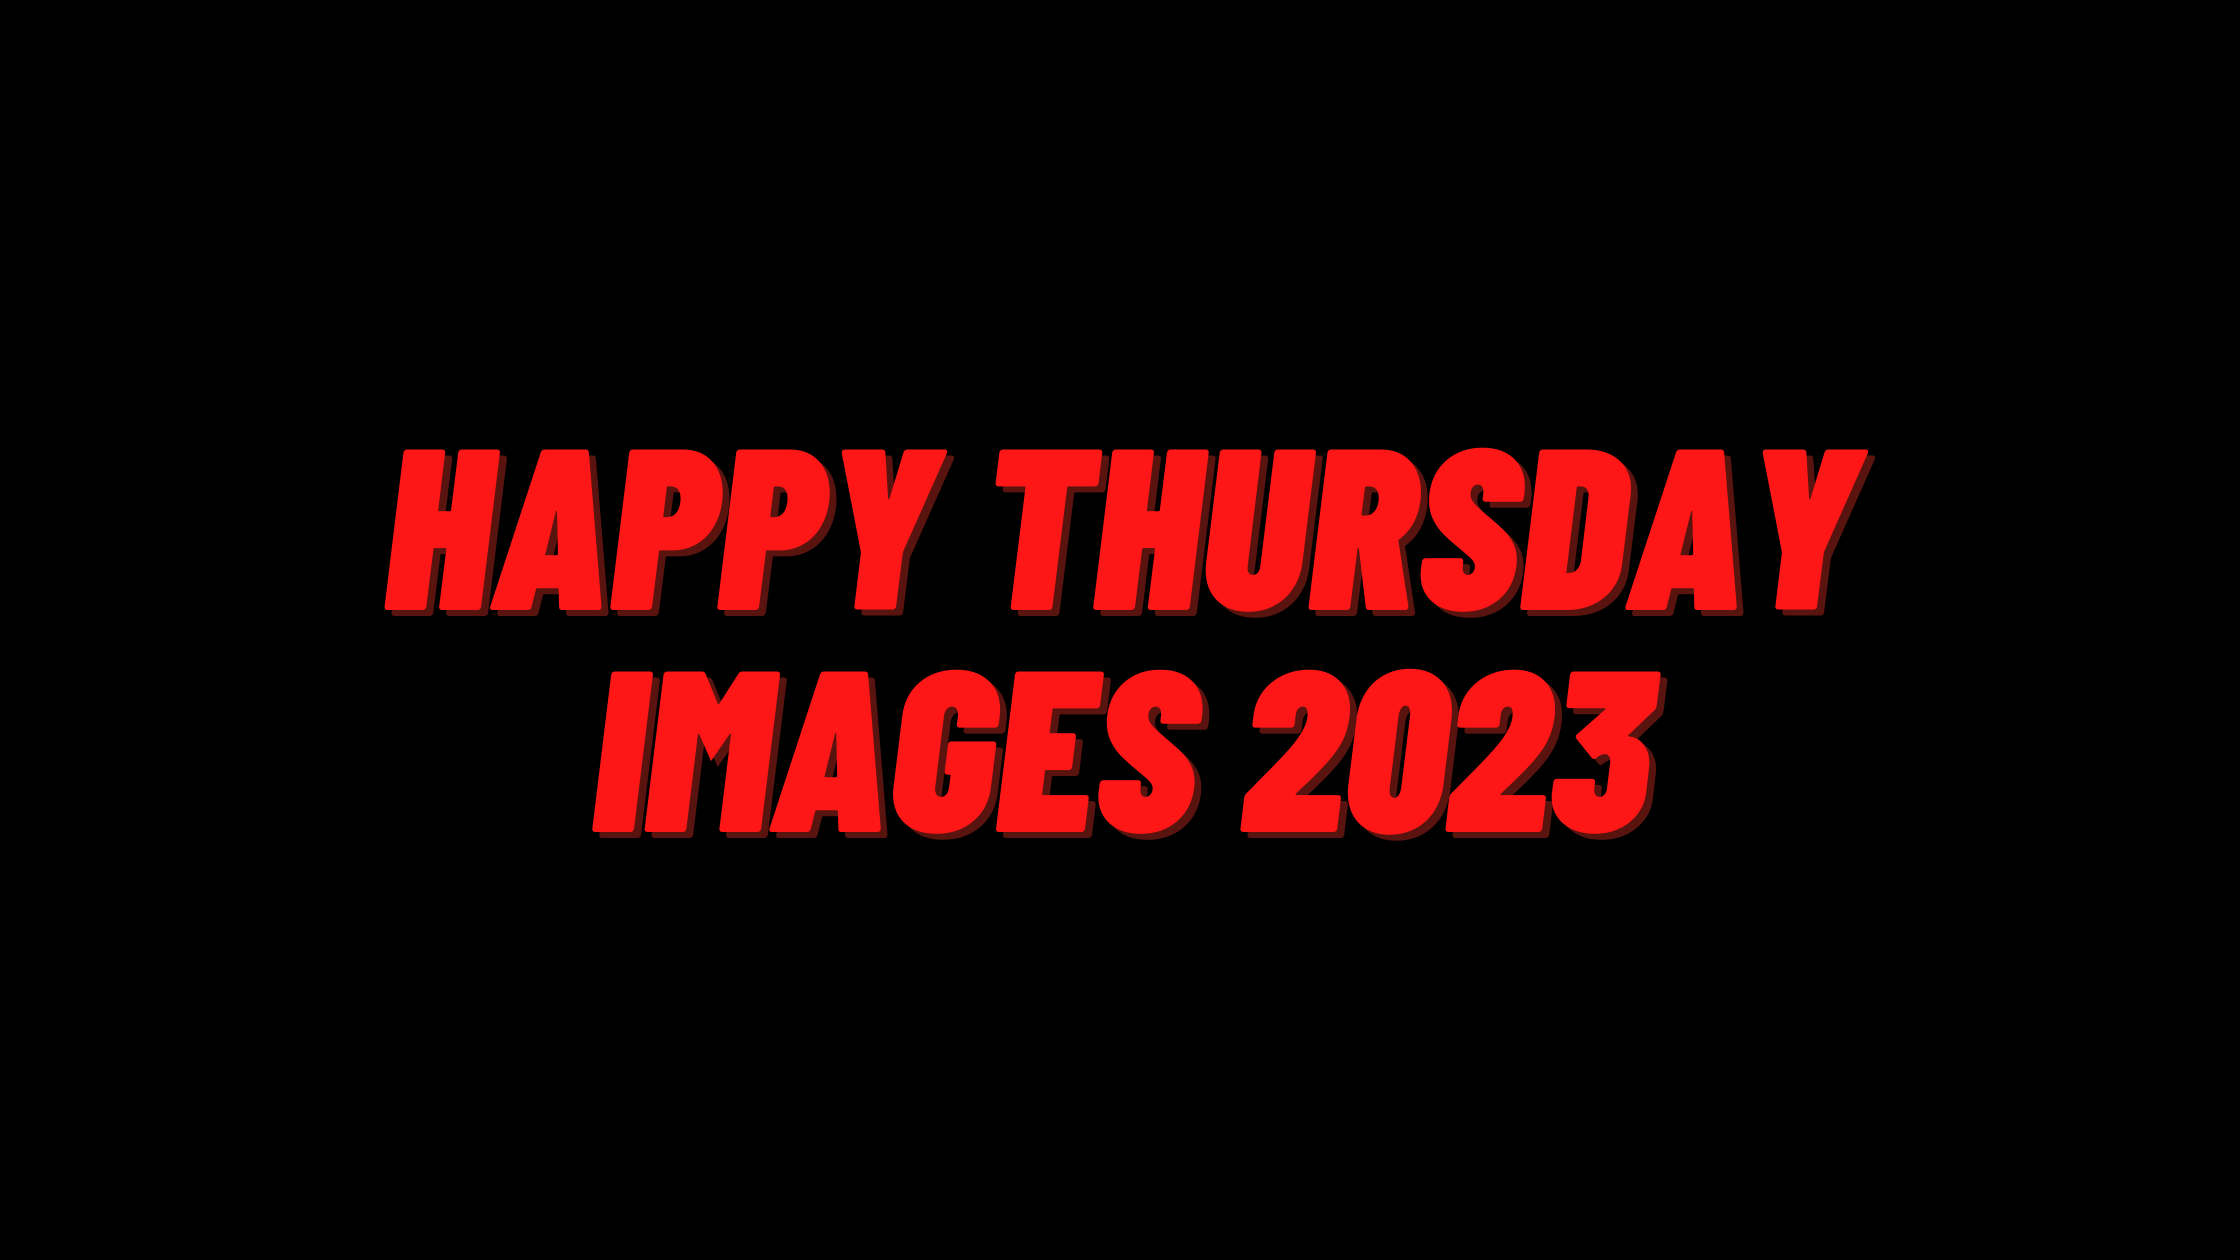 Happy-thursday-images